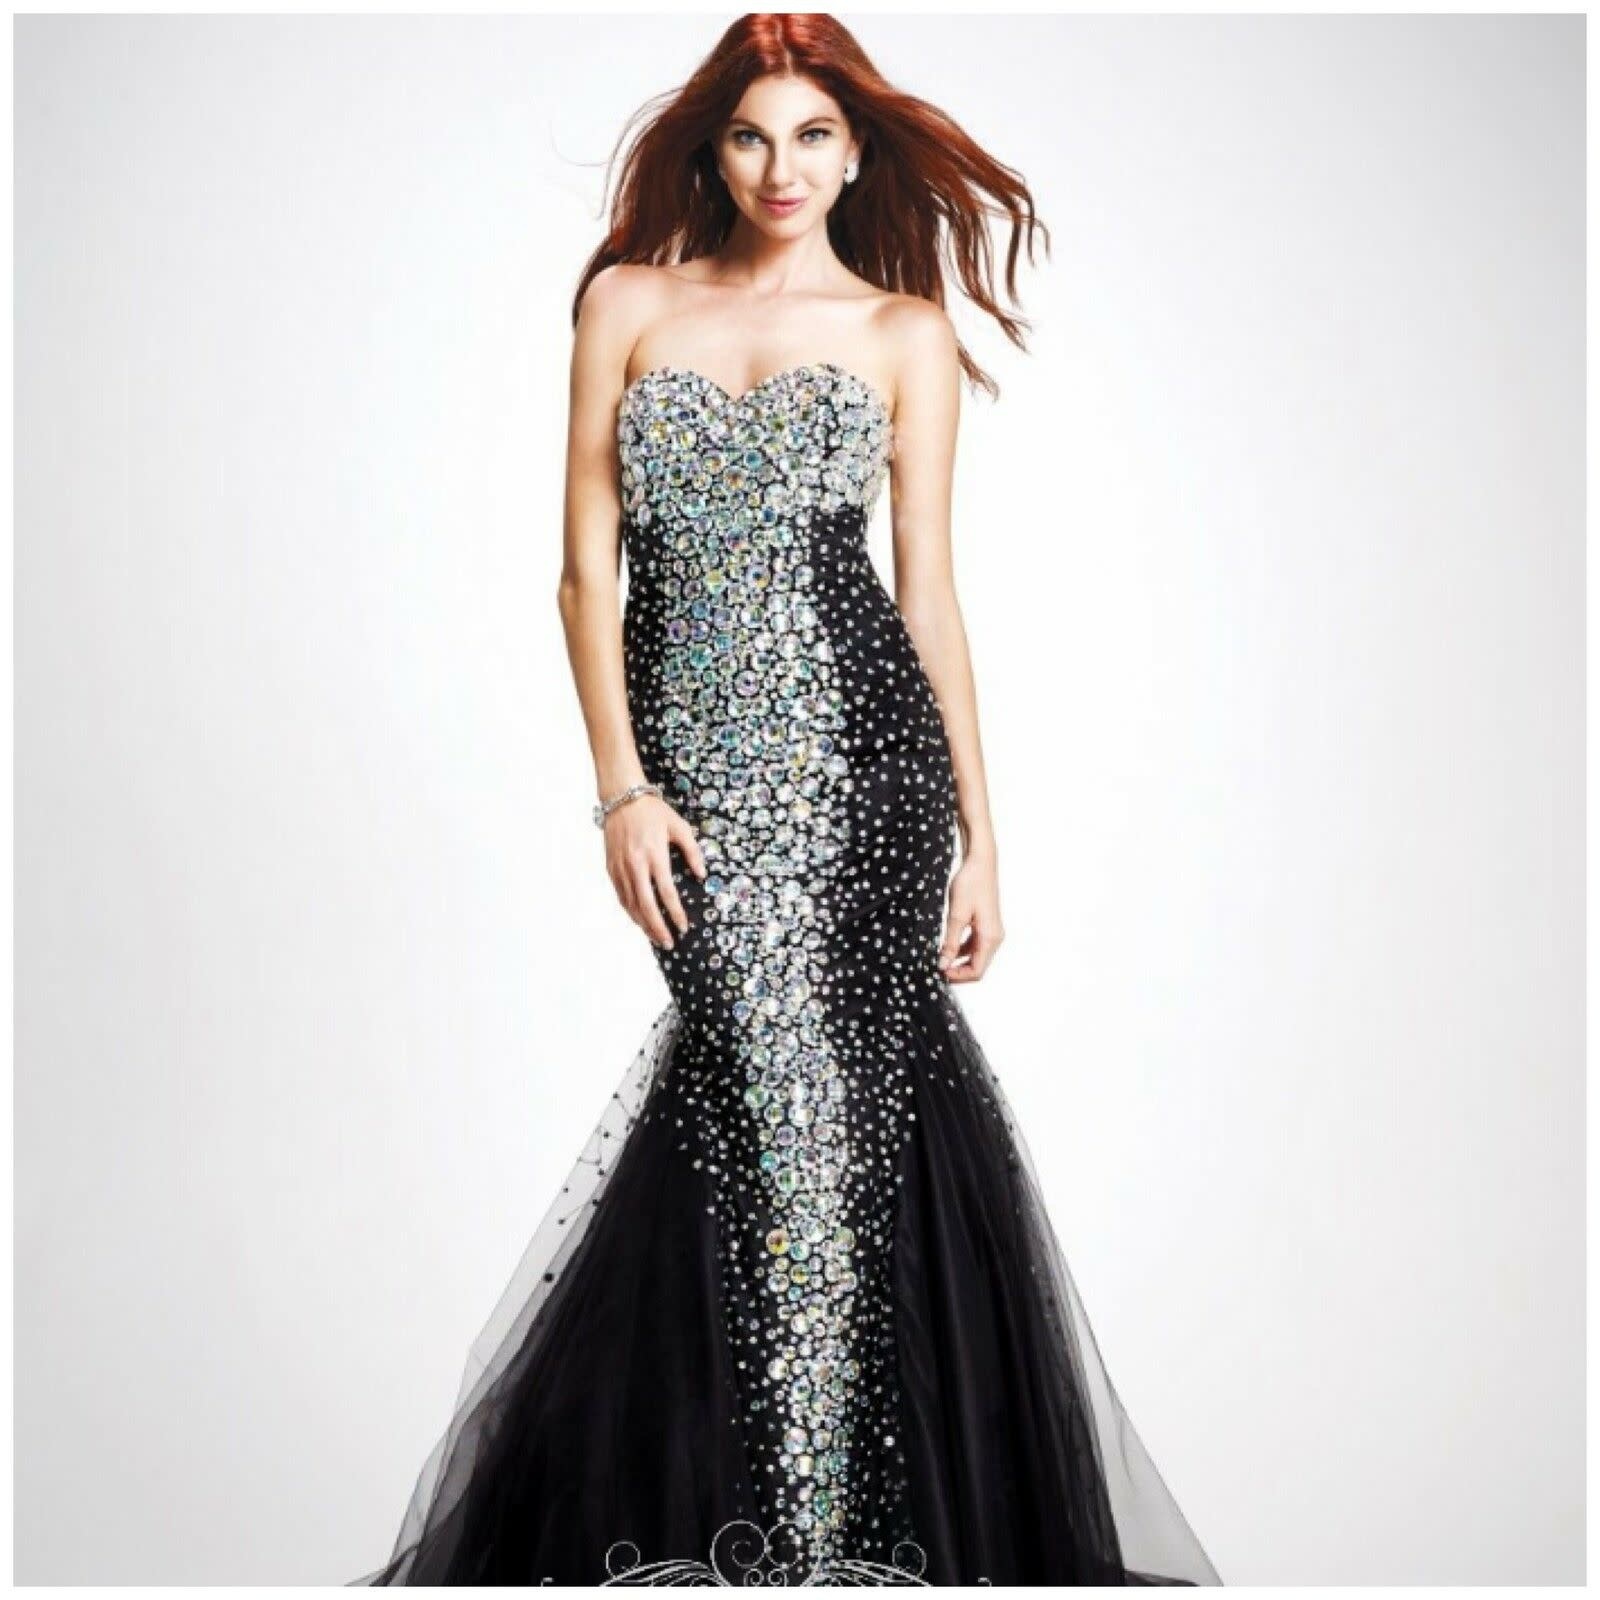 COLORS COLORS STRAPLESS CRYSTAL EMBROIDERED GOWNS BLACK SILVER 16